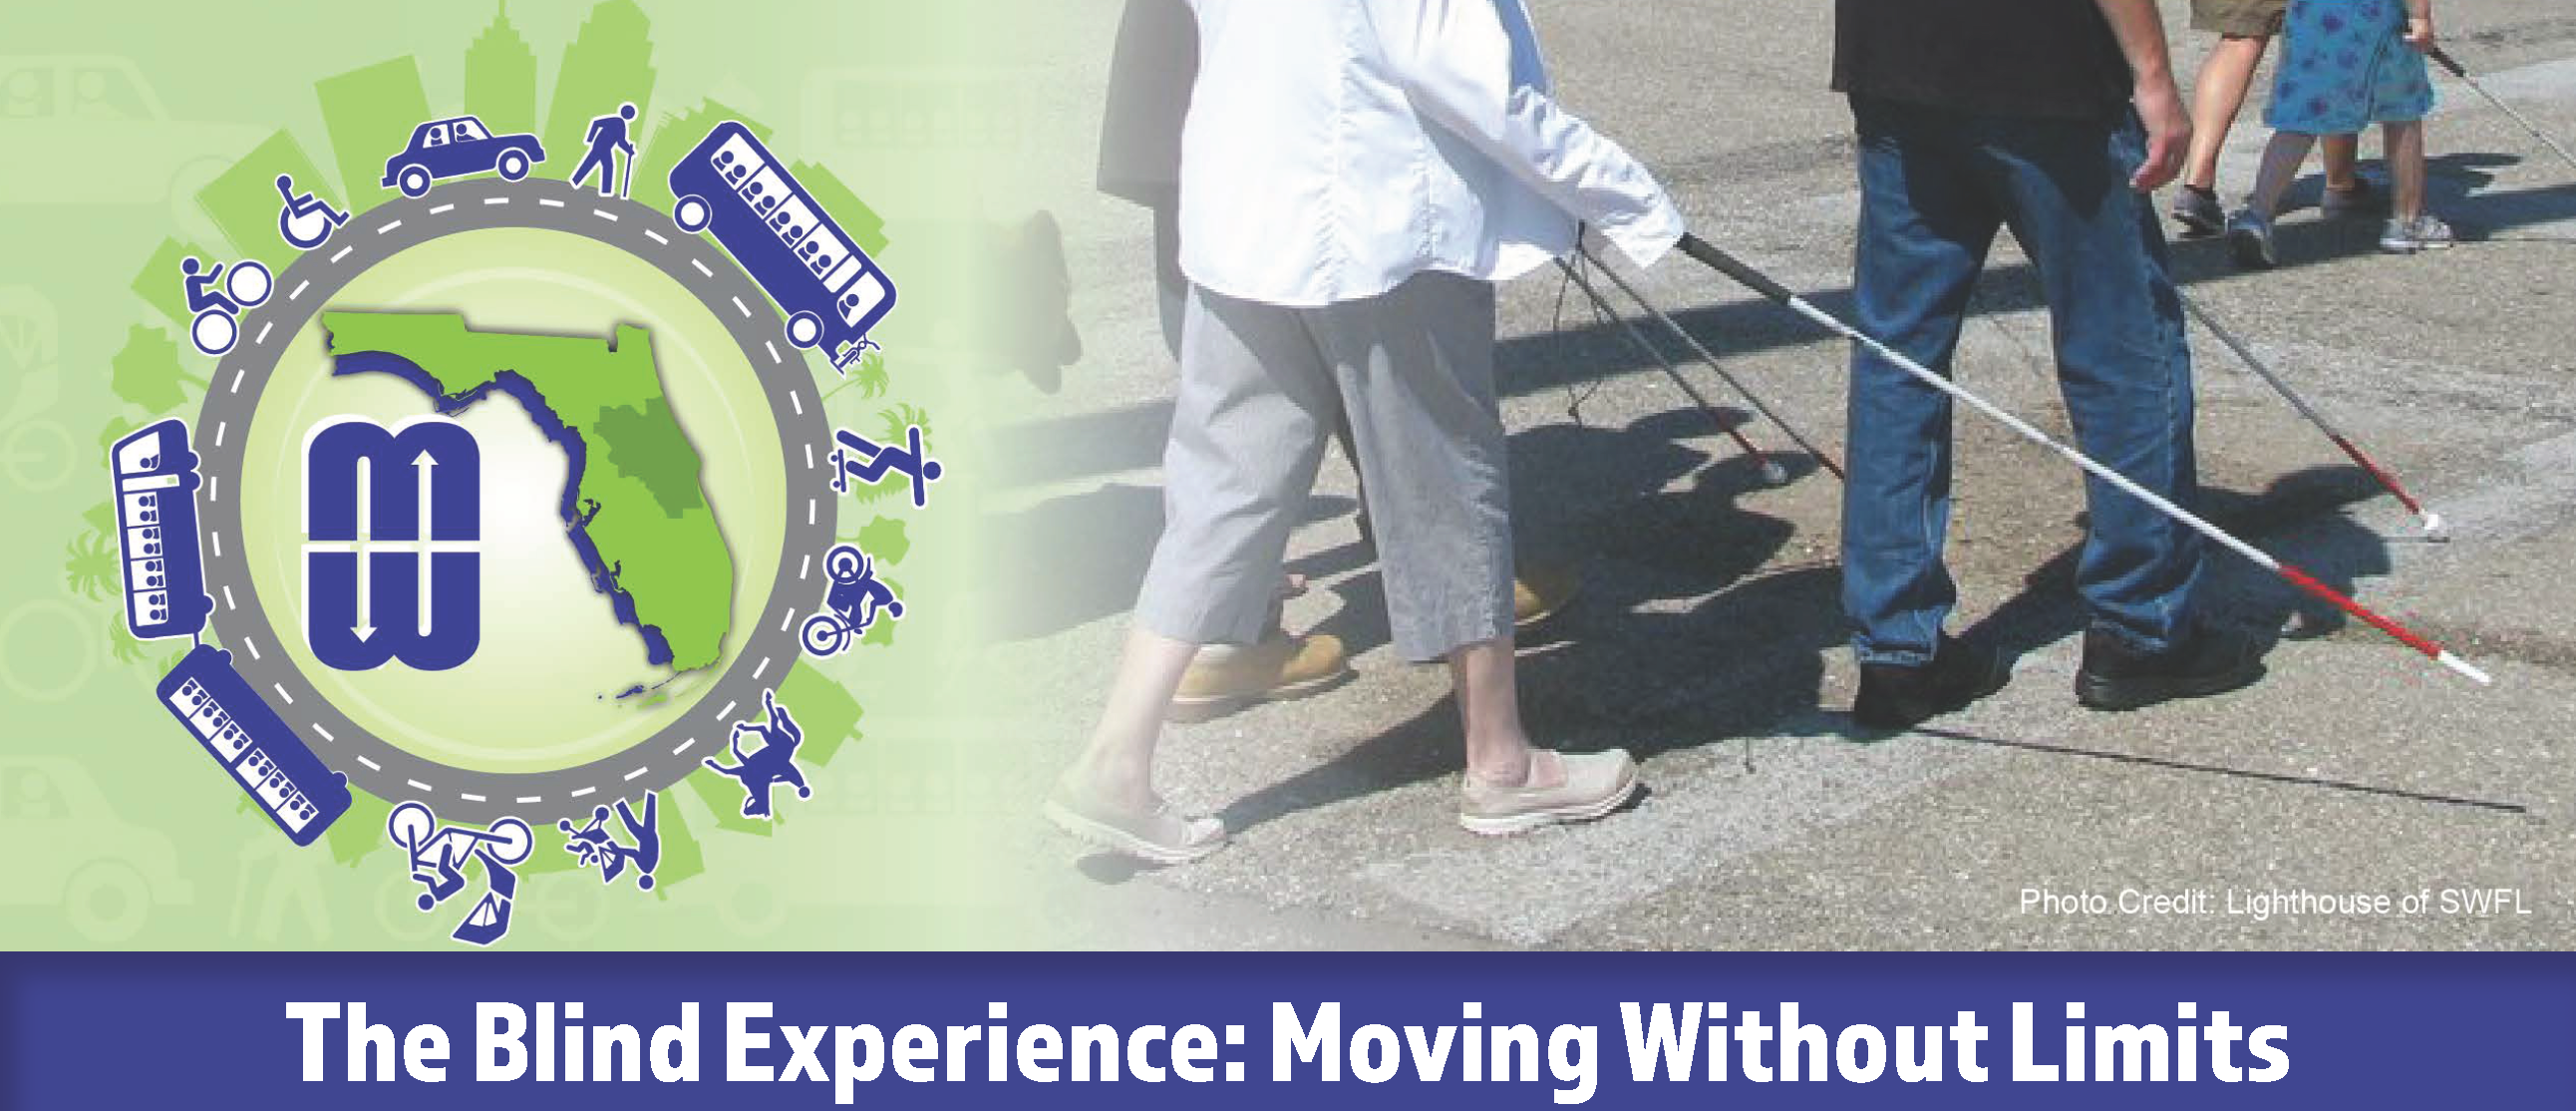 The blind experience, moving without limits banner.